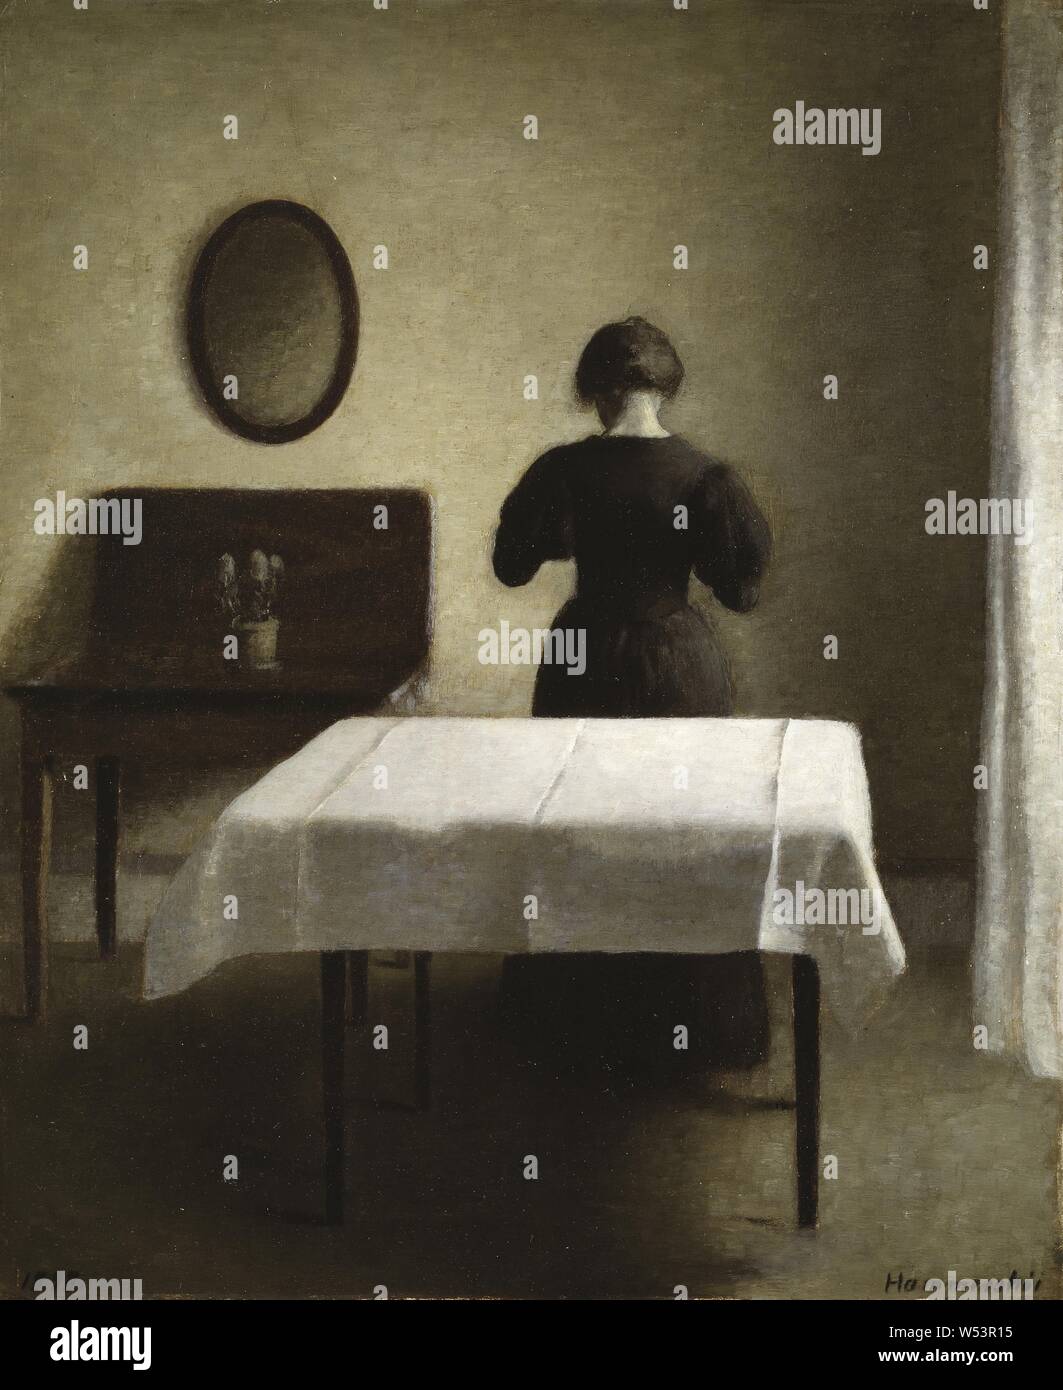 Vilhelm Hammershøi, Interior, painting, 1898, Oil on canvas, Height, 51.5 cm (20.2 inches), Width, 46 cm (18.1 inches), Signed, Hammershøi 1898 Stock Photo